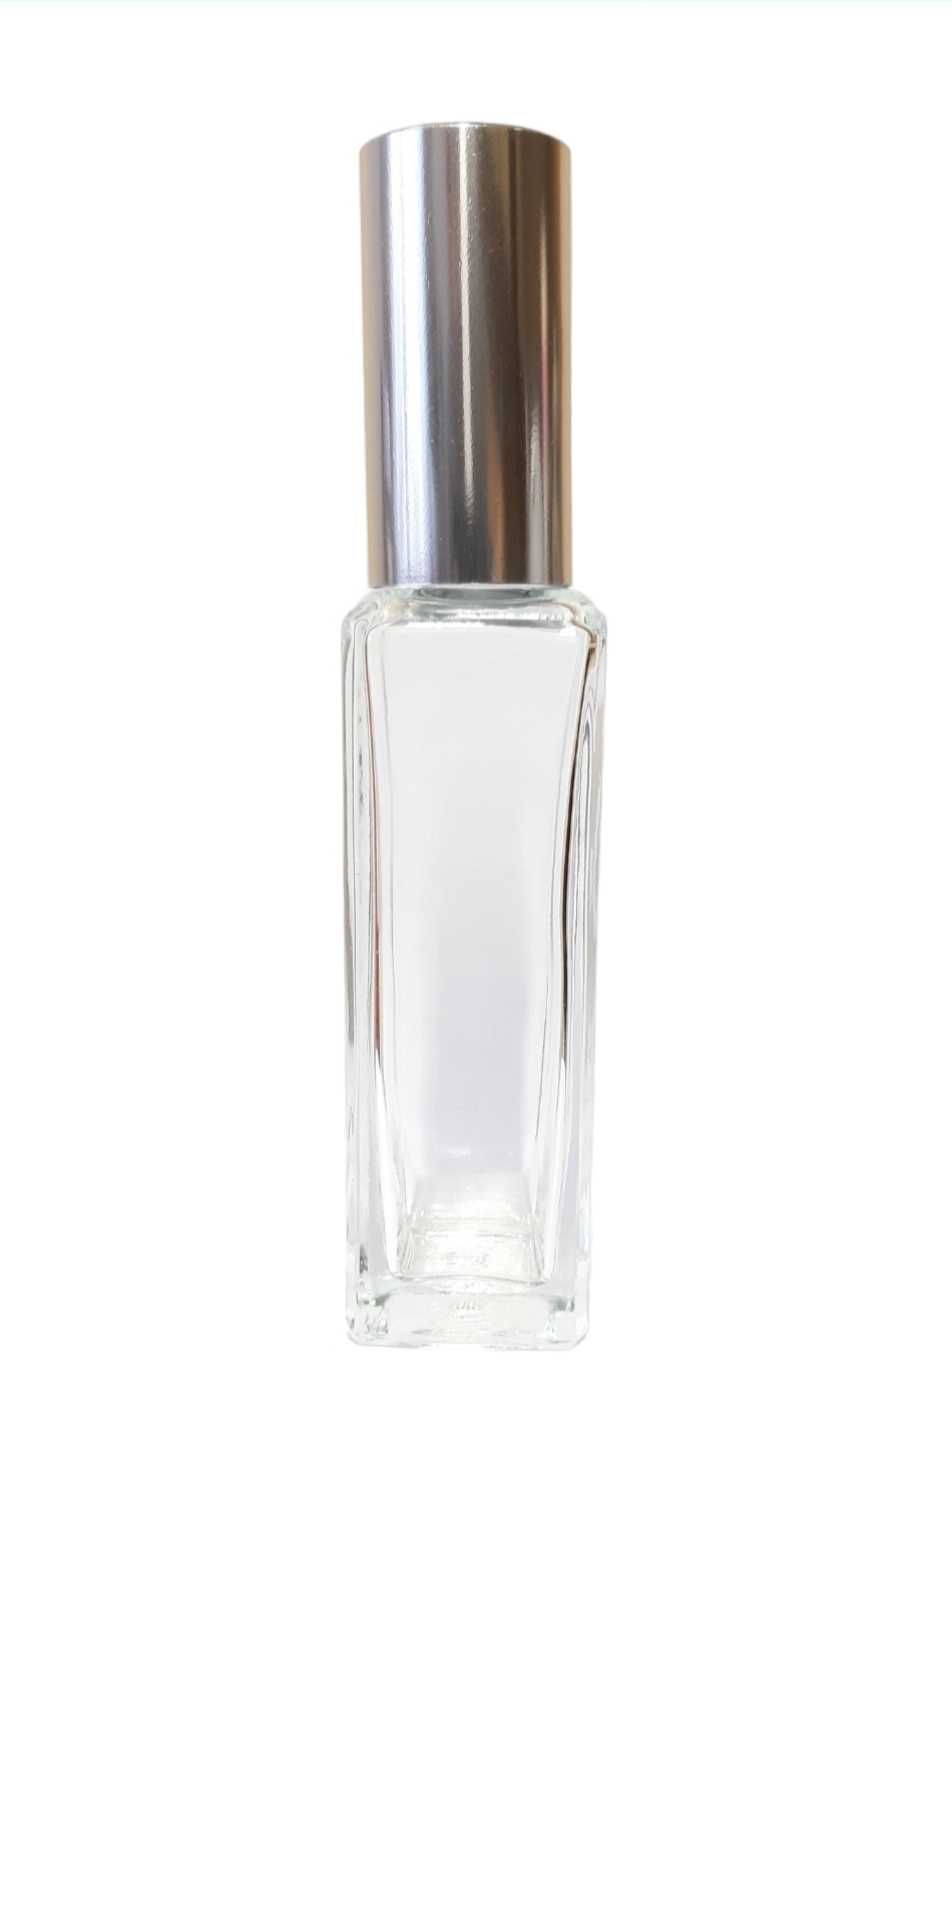 D&G The One 34ml woman